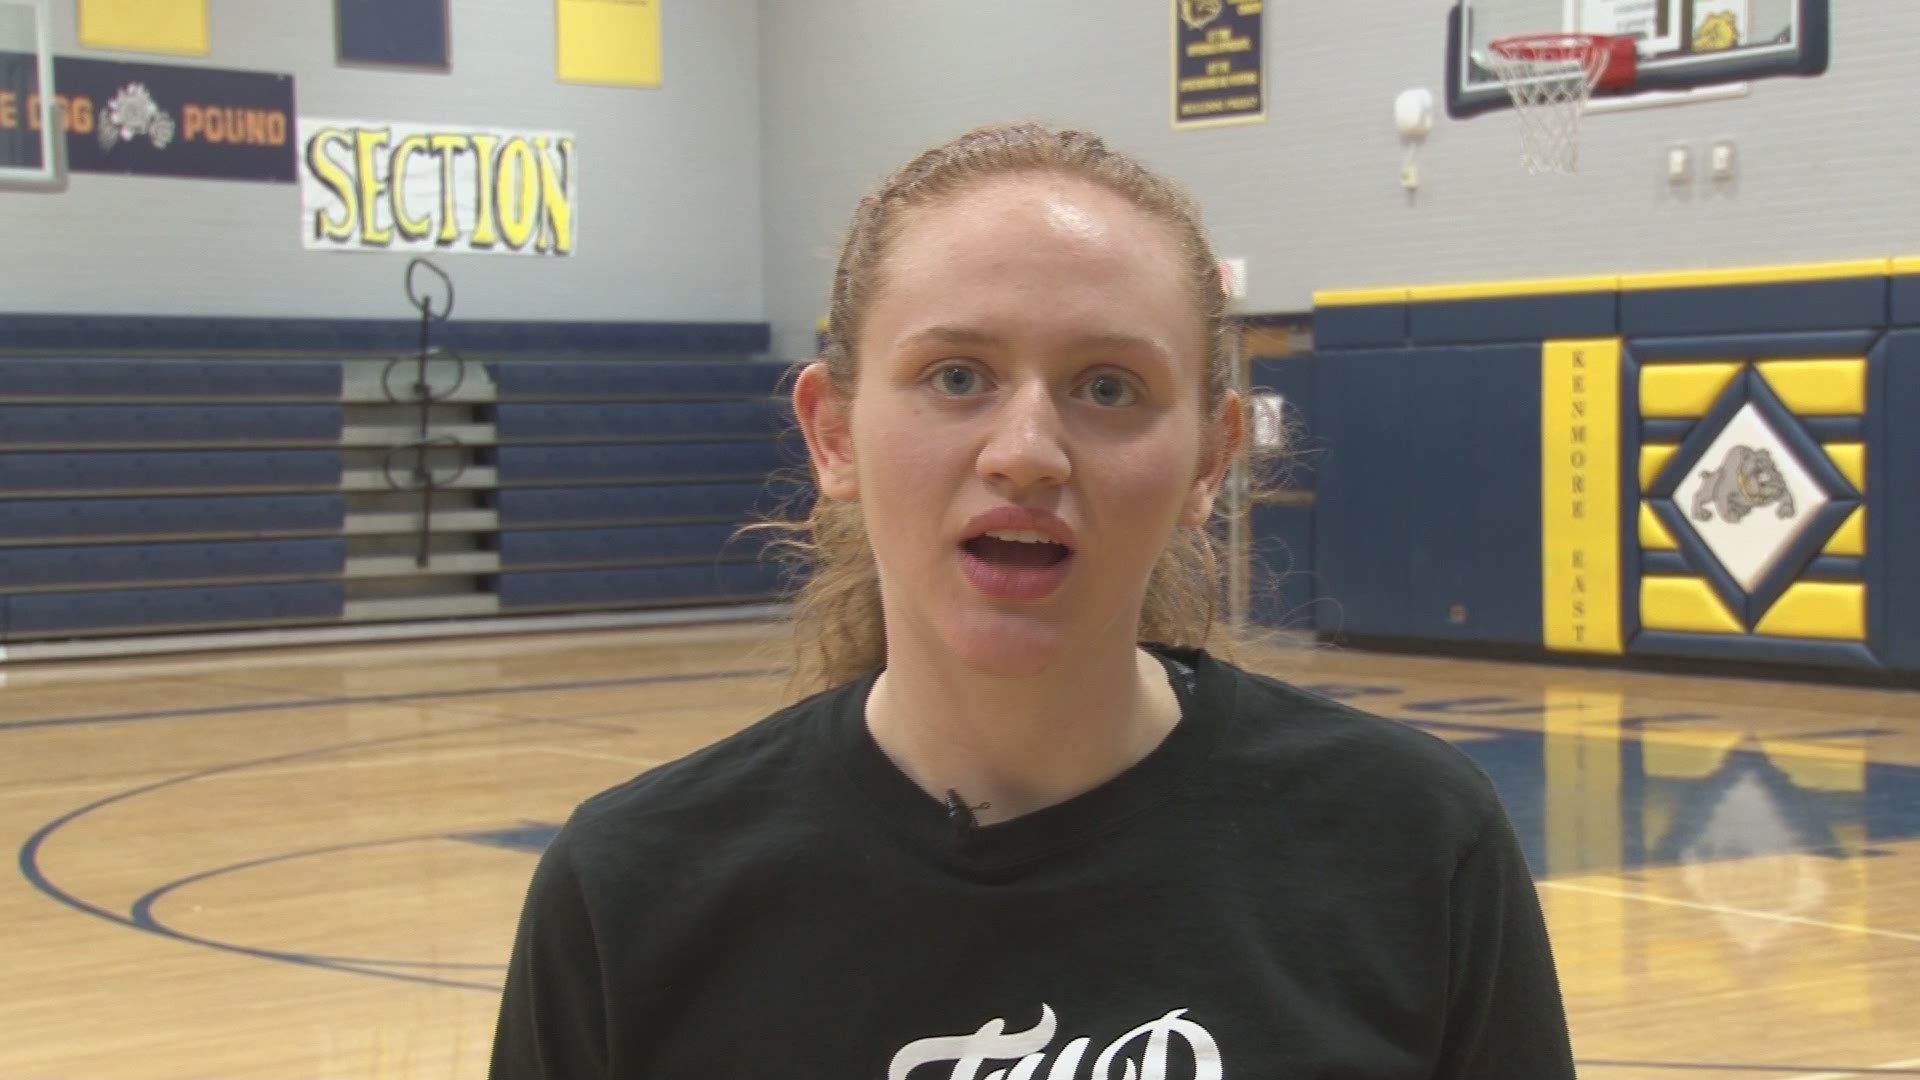 Lyndsay O'Brien has returned to play three sports at Kenmore East after tearing the ACL in both her knees.